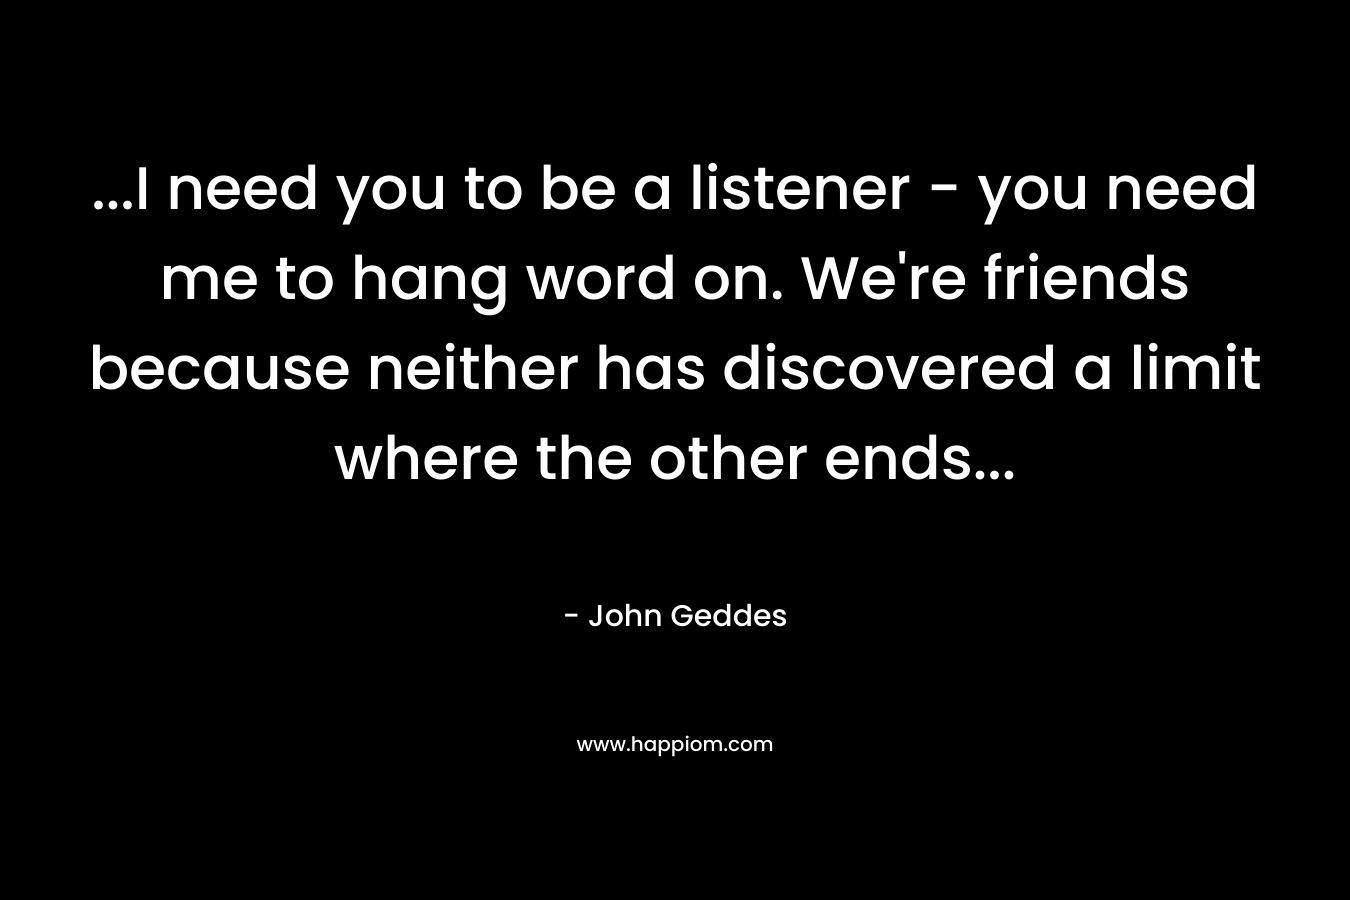 ...I need you to be a listener - you need me to hang word on. We're friends because neither has discovered a limit where the other ends...